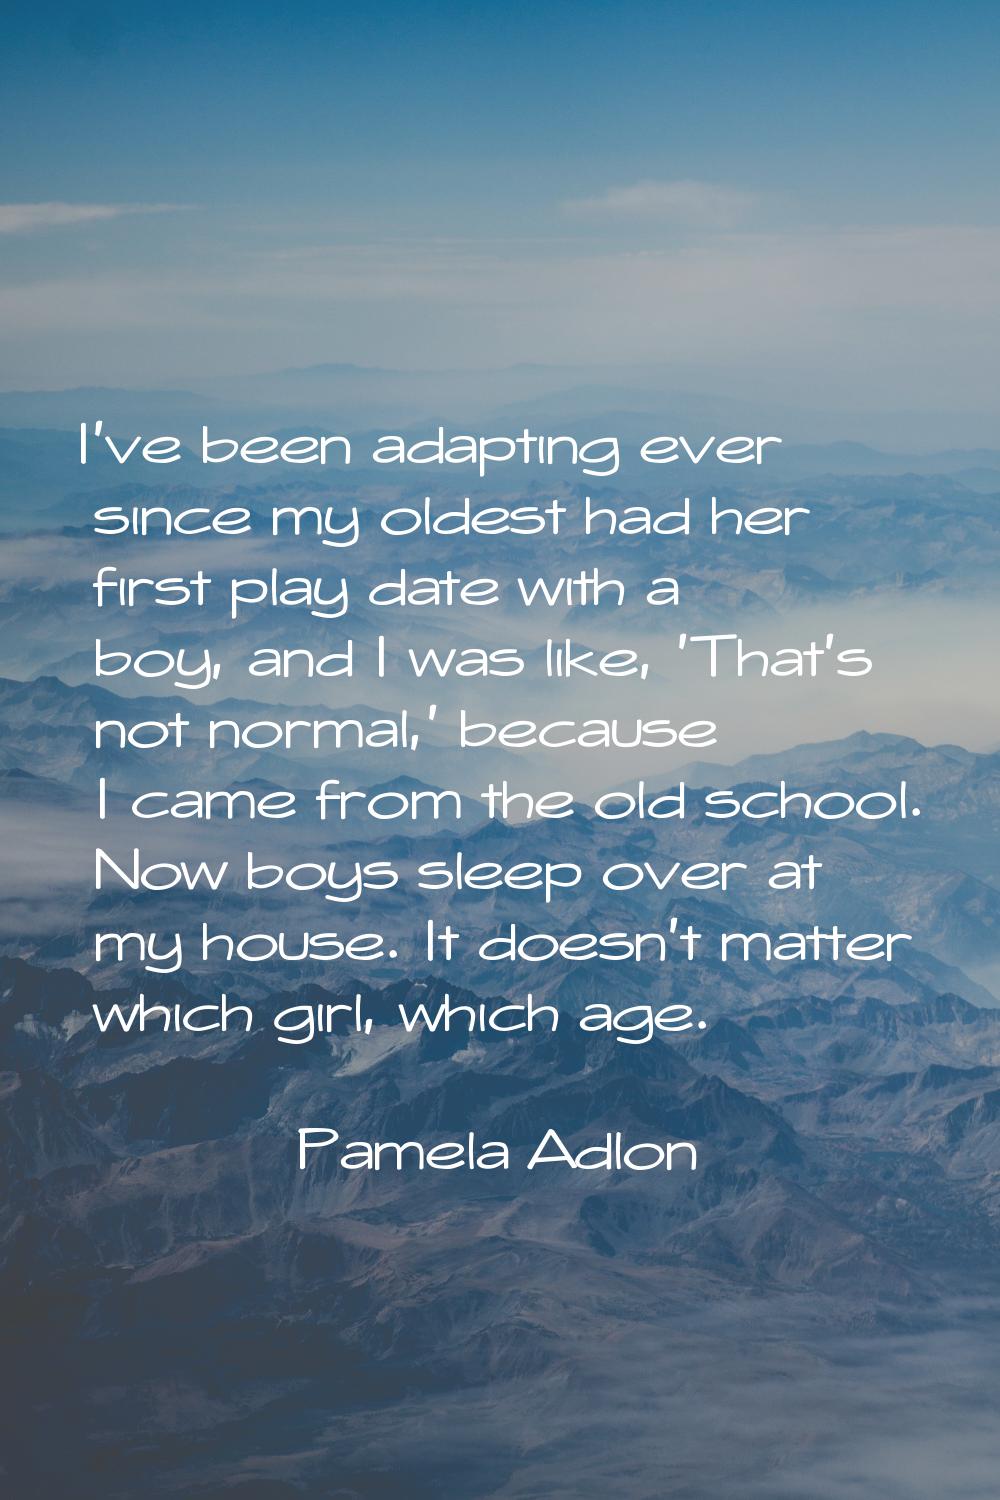 I've been adapting ever since my oldest had her first play date with a boy, and I was like, 'That's